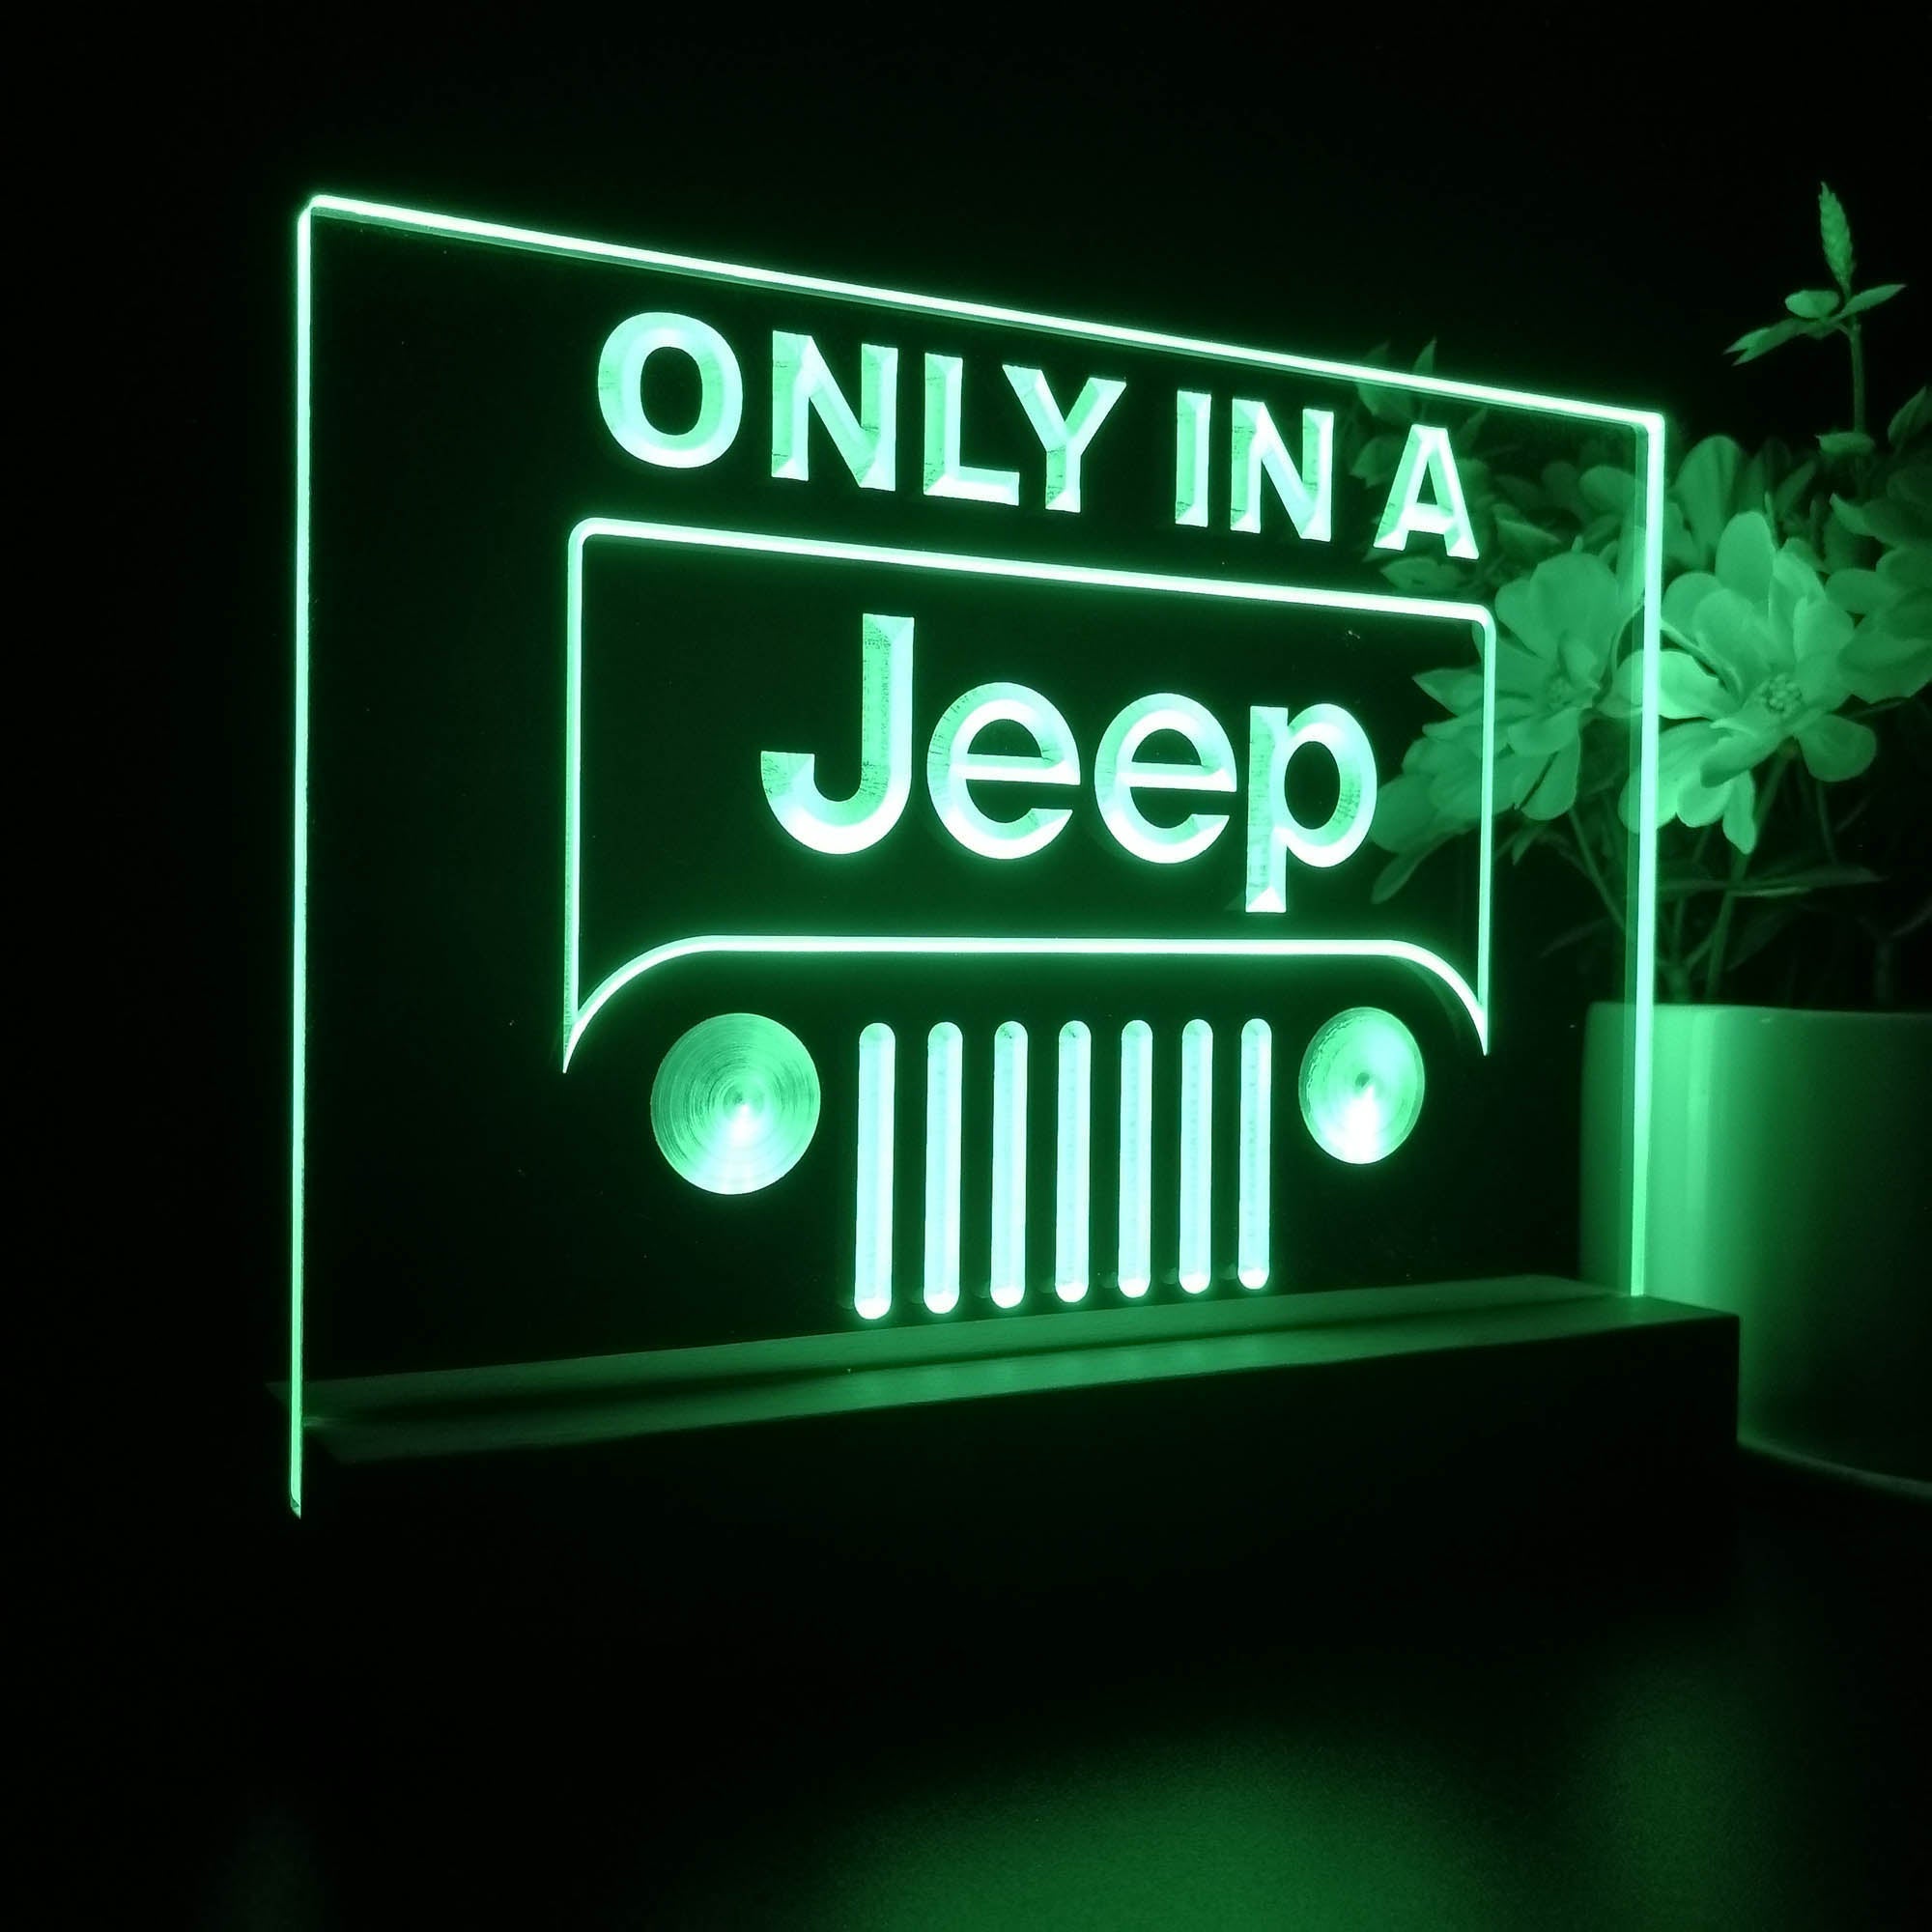 Only in a Jeep 4x4 Sport 3D Illusion Night Light Desk Lamp